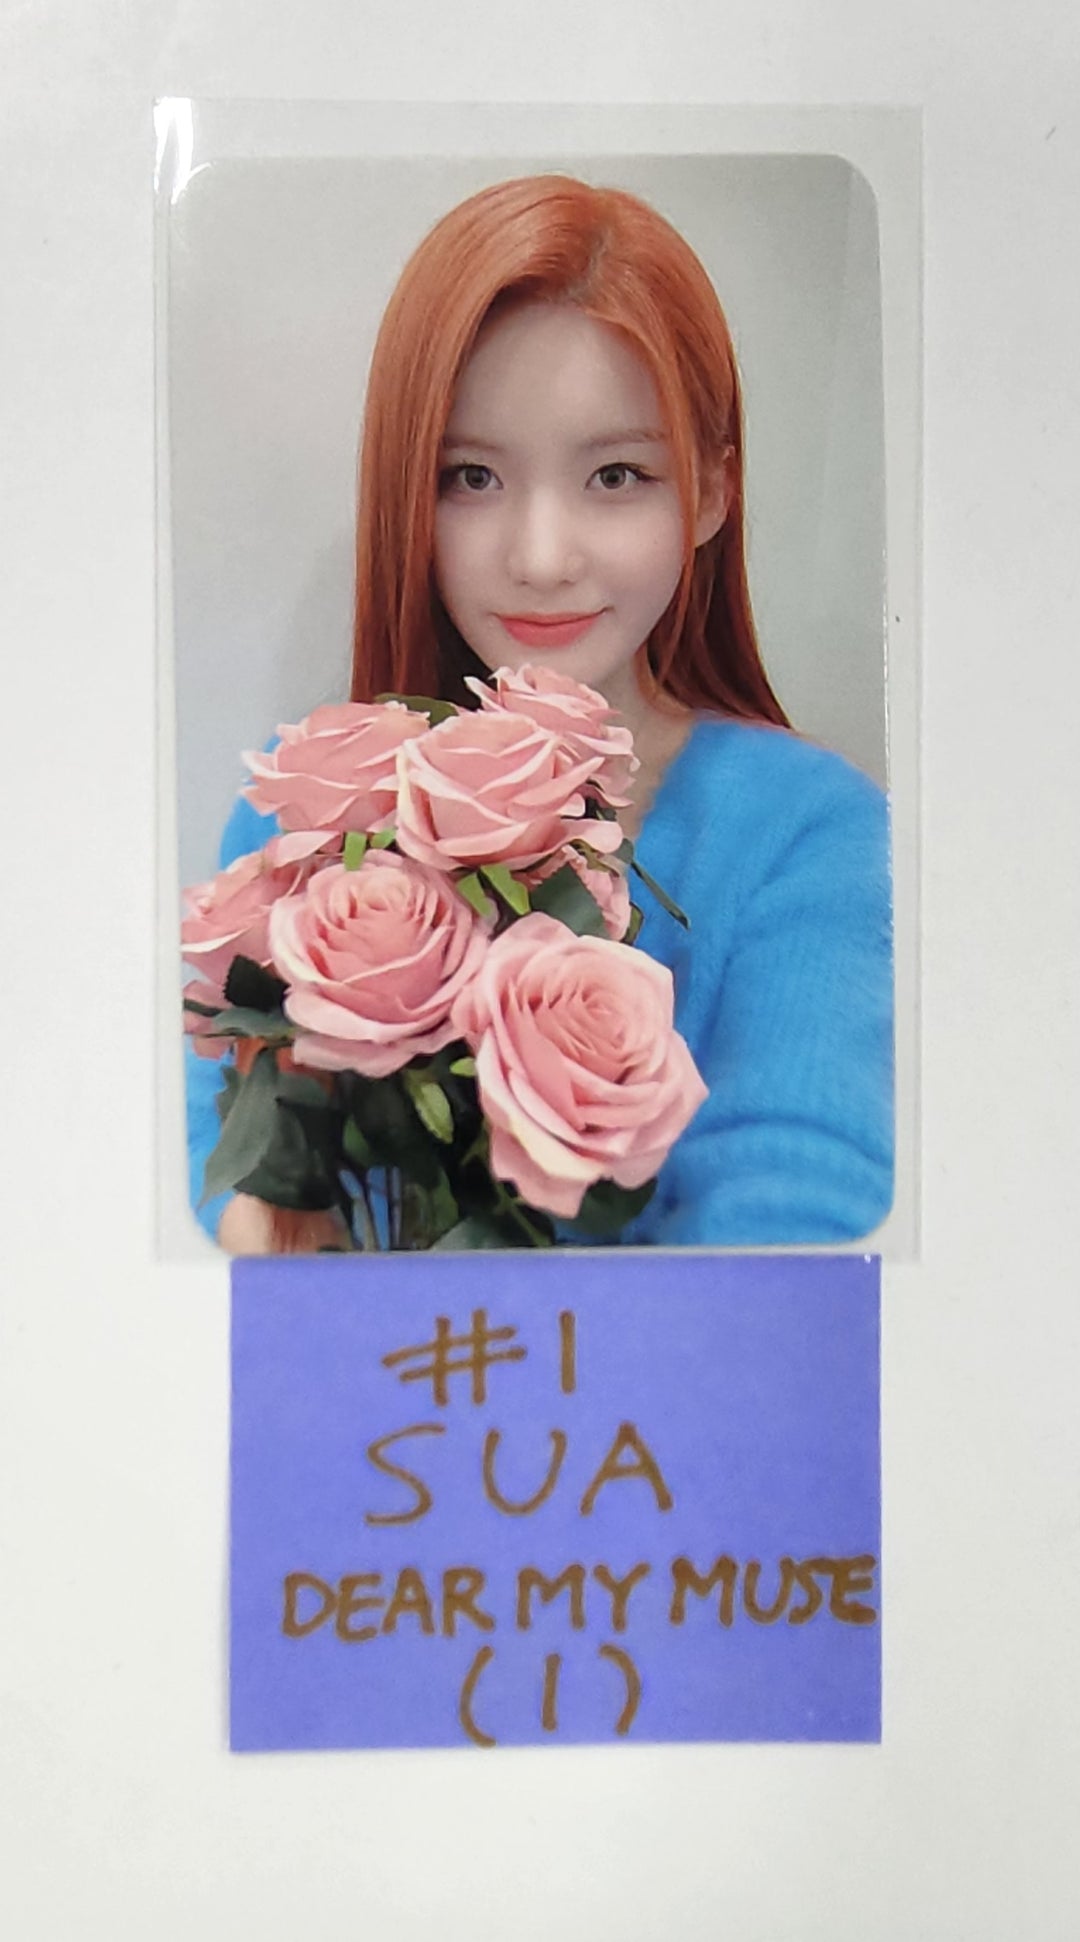 CSR "DELIGHT" - Dear My Muse Fansign Event Photocard